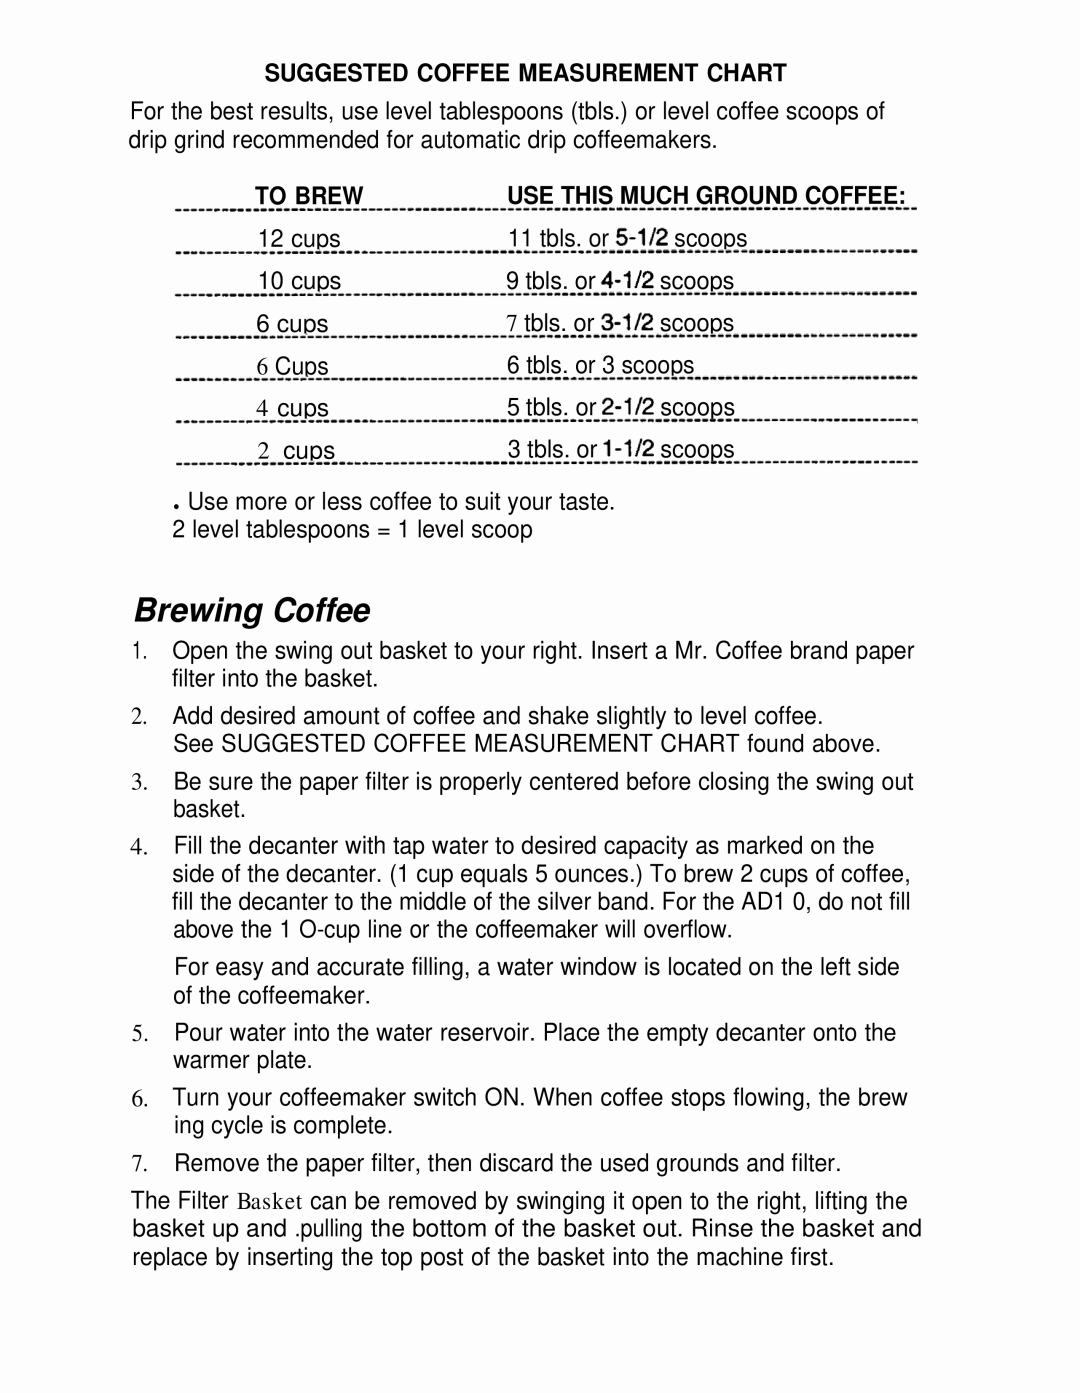 Mr. Coffee AD10 AND AD12 manual Brewing Coffee, Suggested Coffee Measurement Chart, To Brew 